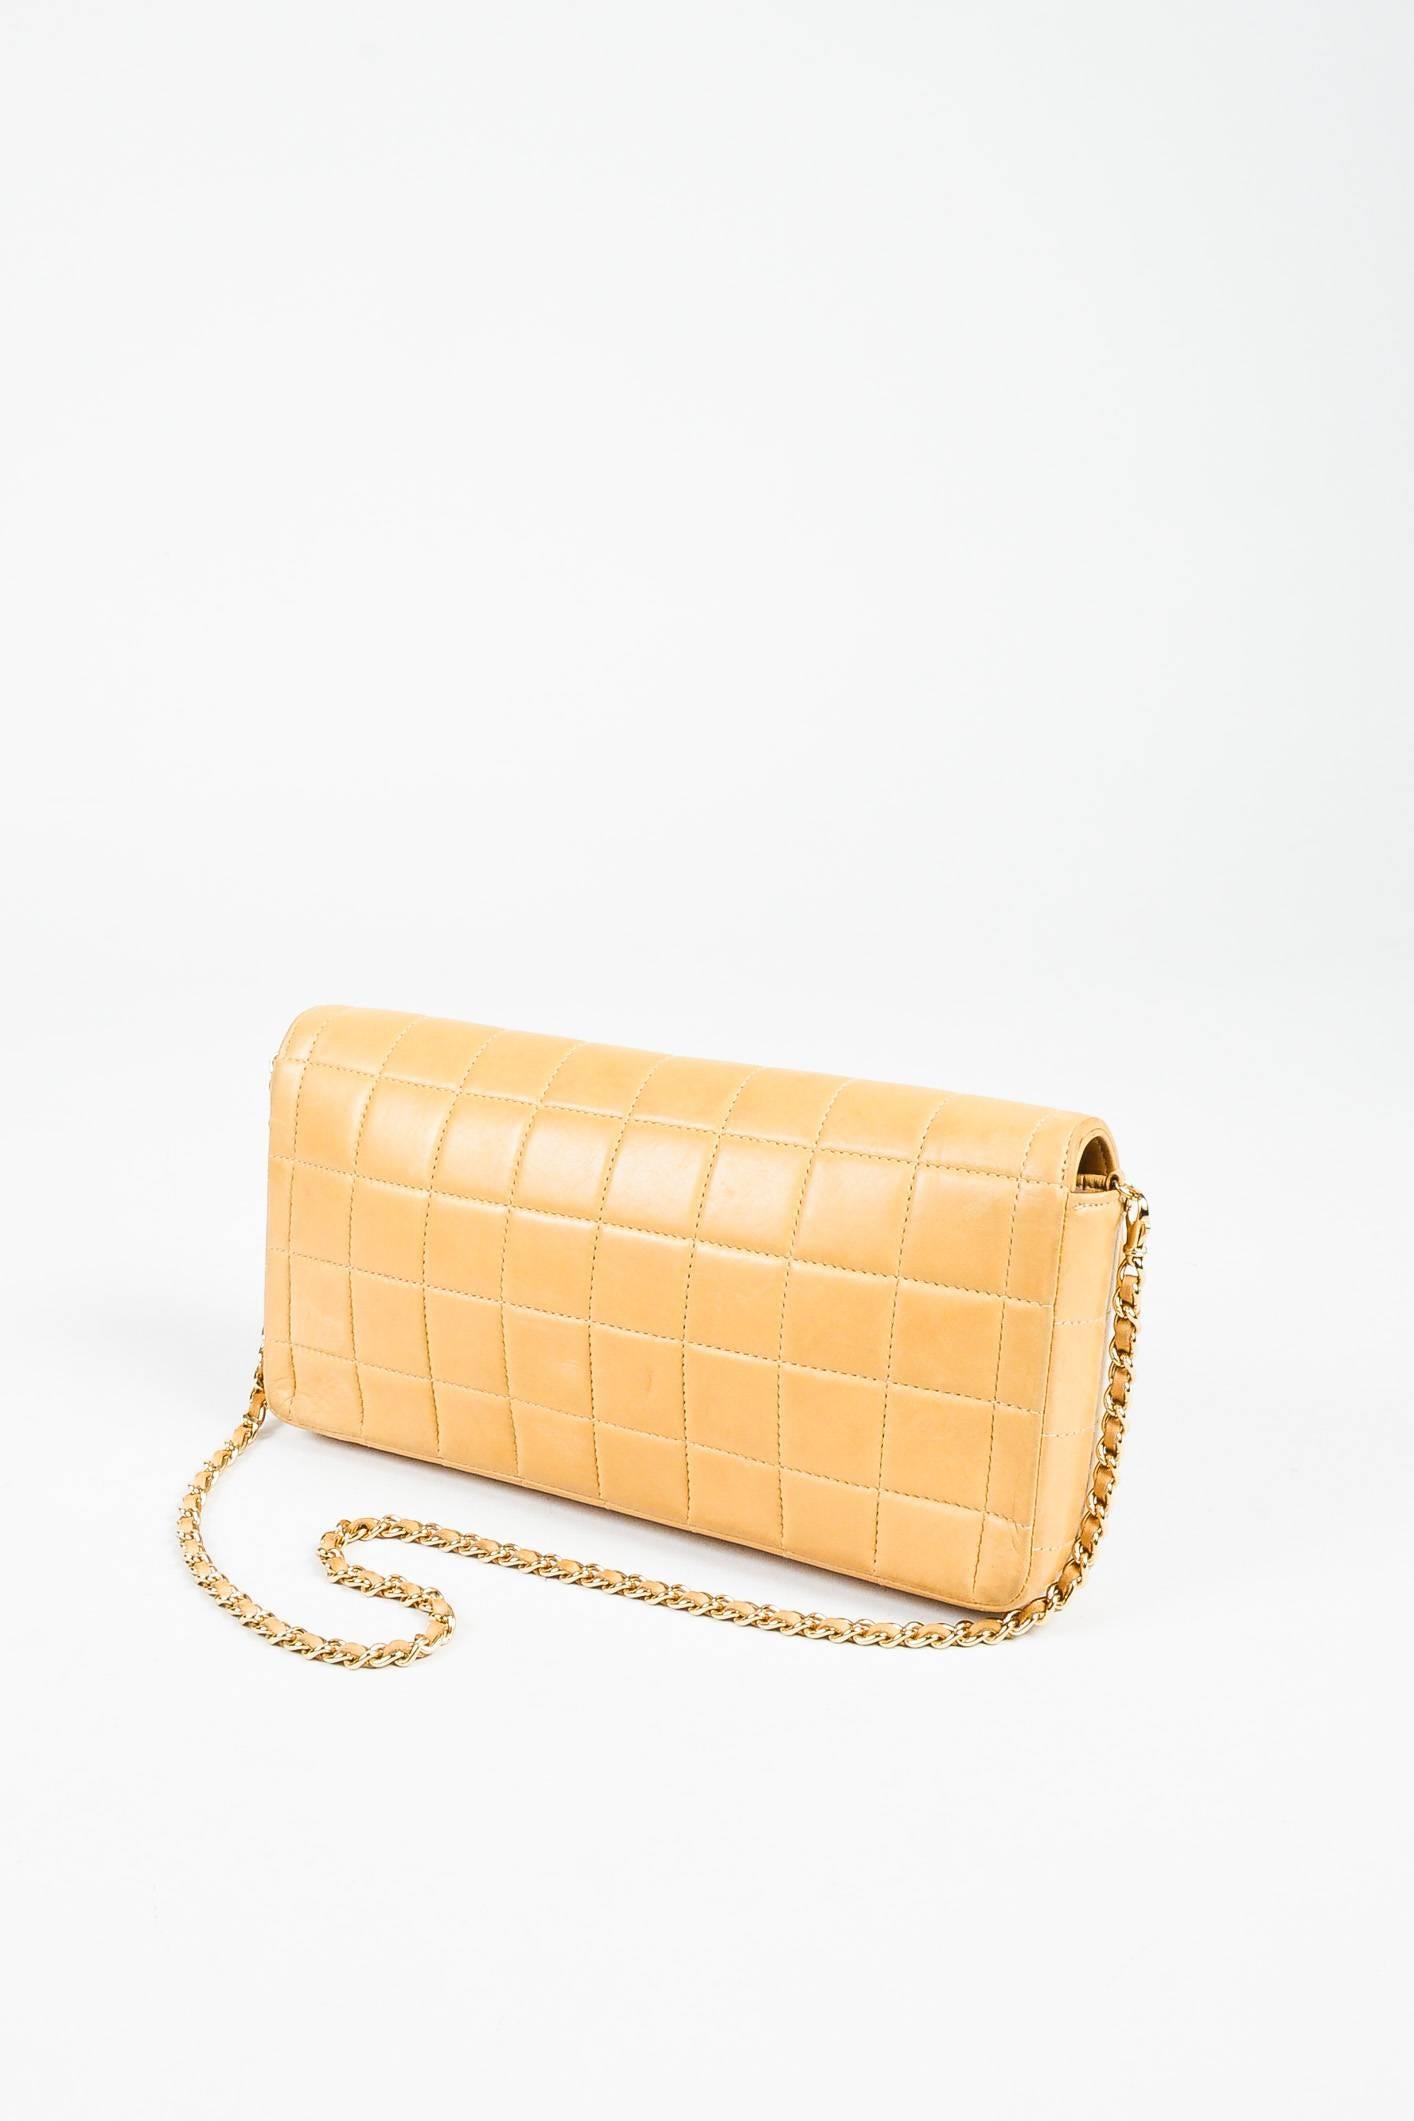 Chanel quilted leather "East West Chocolate Bar" bag. Features a gold-tone metal chain strap with matching leather woven through each loop. "CC" logo rotating lock closure. Lined with leather.

Interior features: Two open top